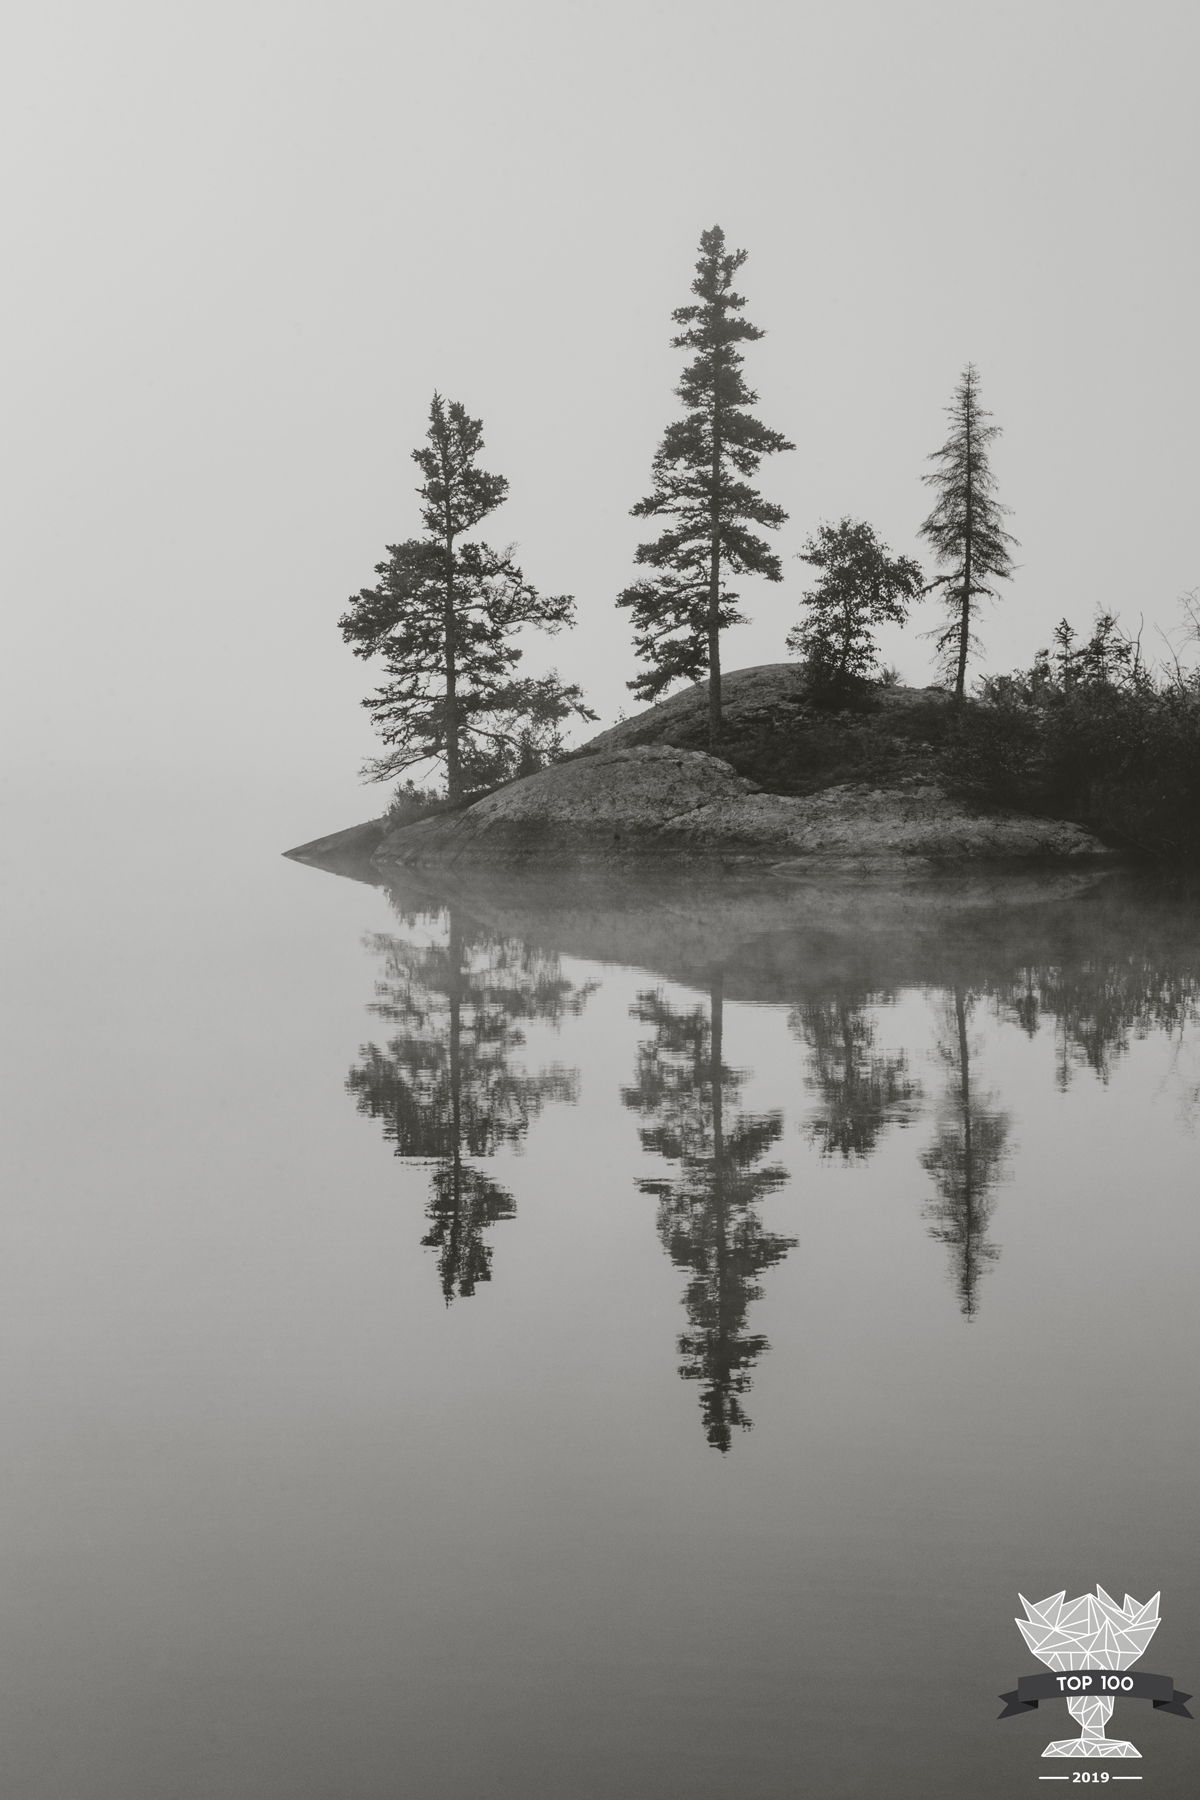 shoot and share contest top 100 photograph of reflection of four trees on the water, horizon obscured by fog, water is still as glass